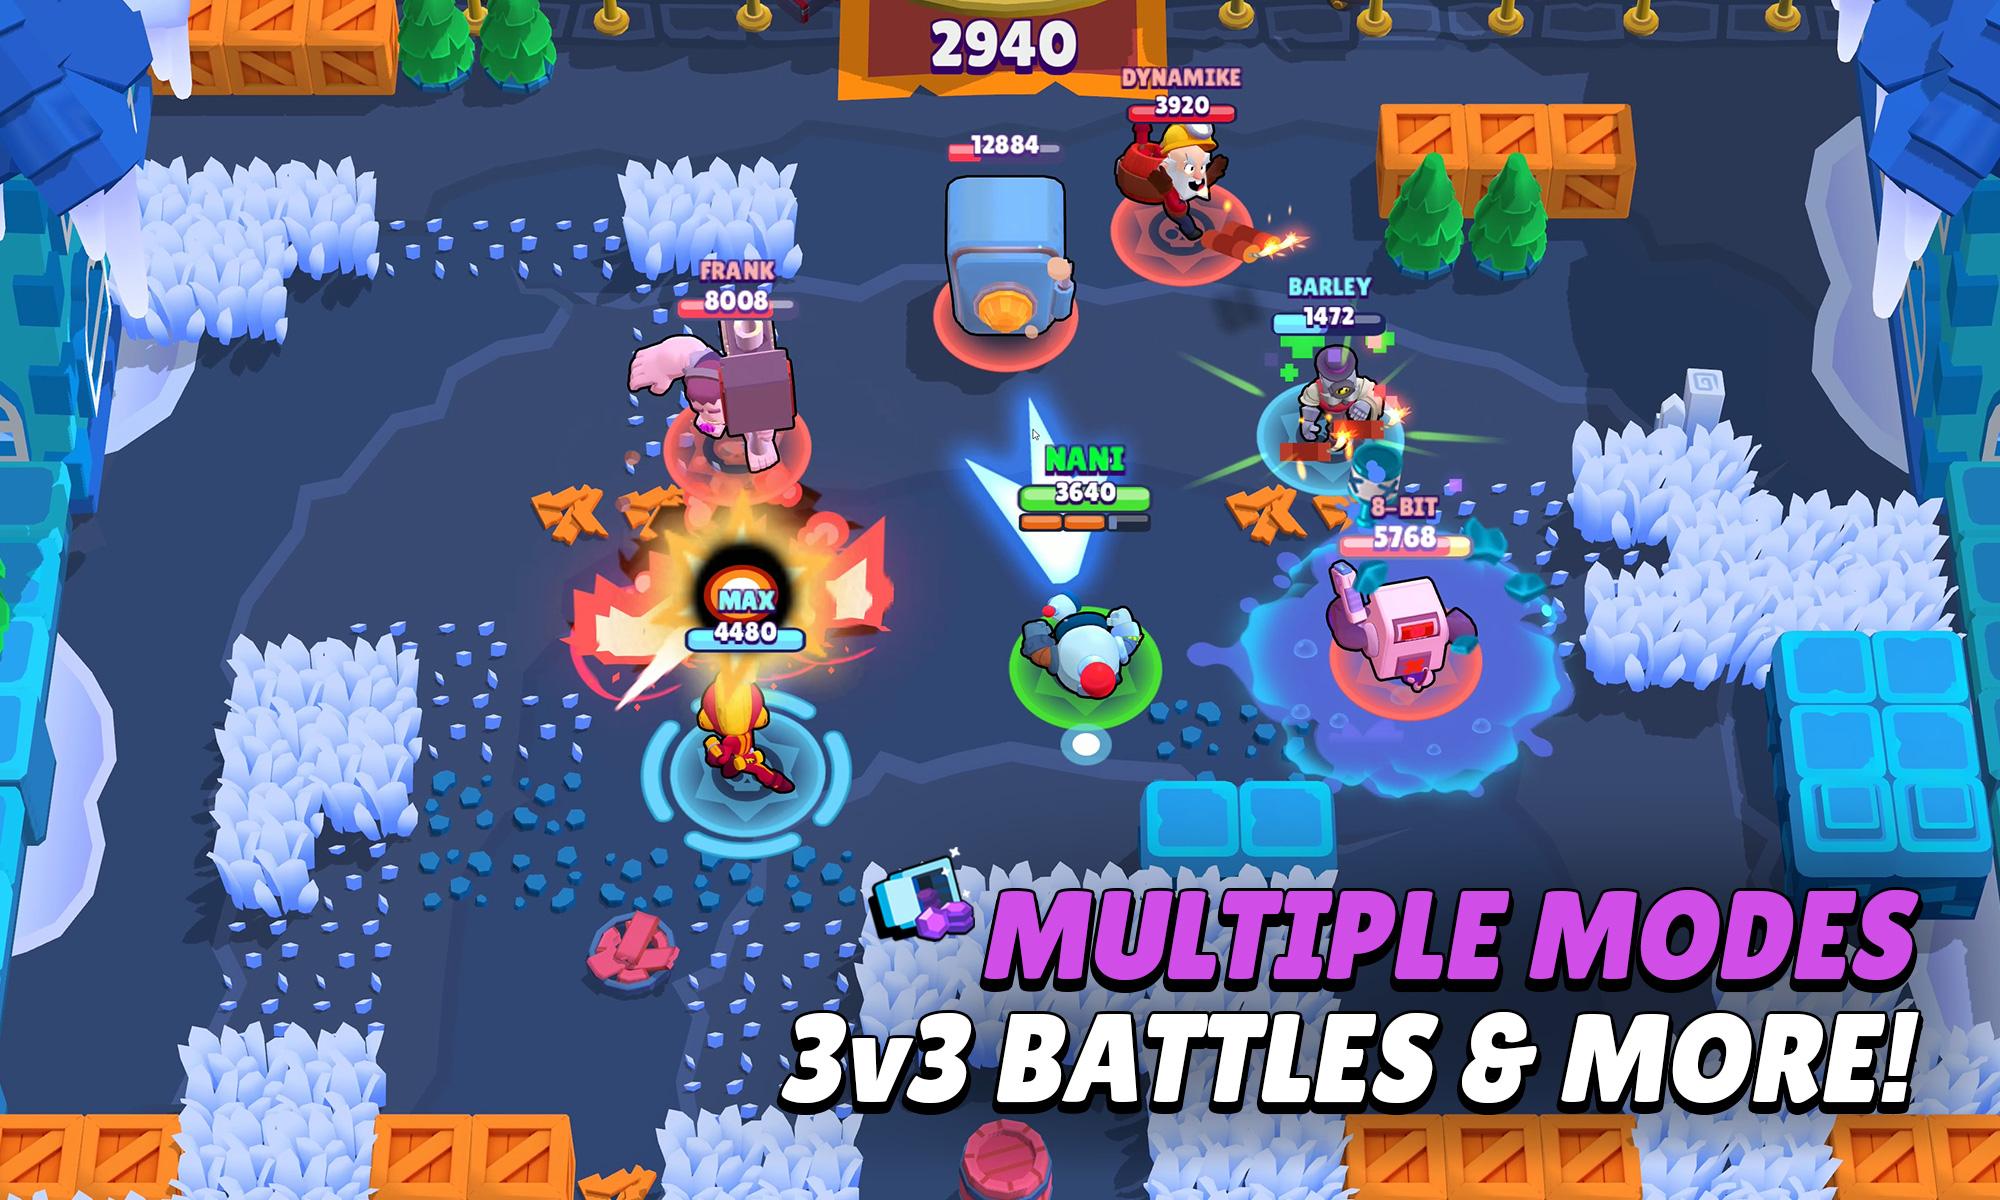 Brawl Stars Apk Download Pick Up Your Hero Characters In 3v3 Smash And Grab Mode Brock Shelly Jessie And Barley - brawl stars 23.99 apk download